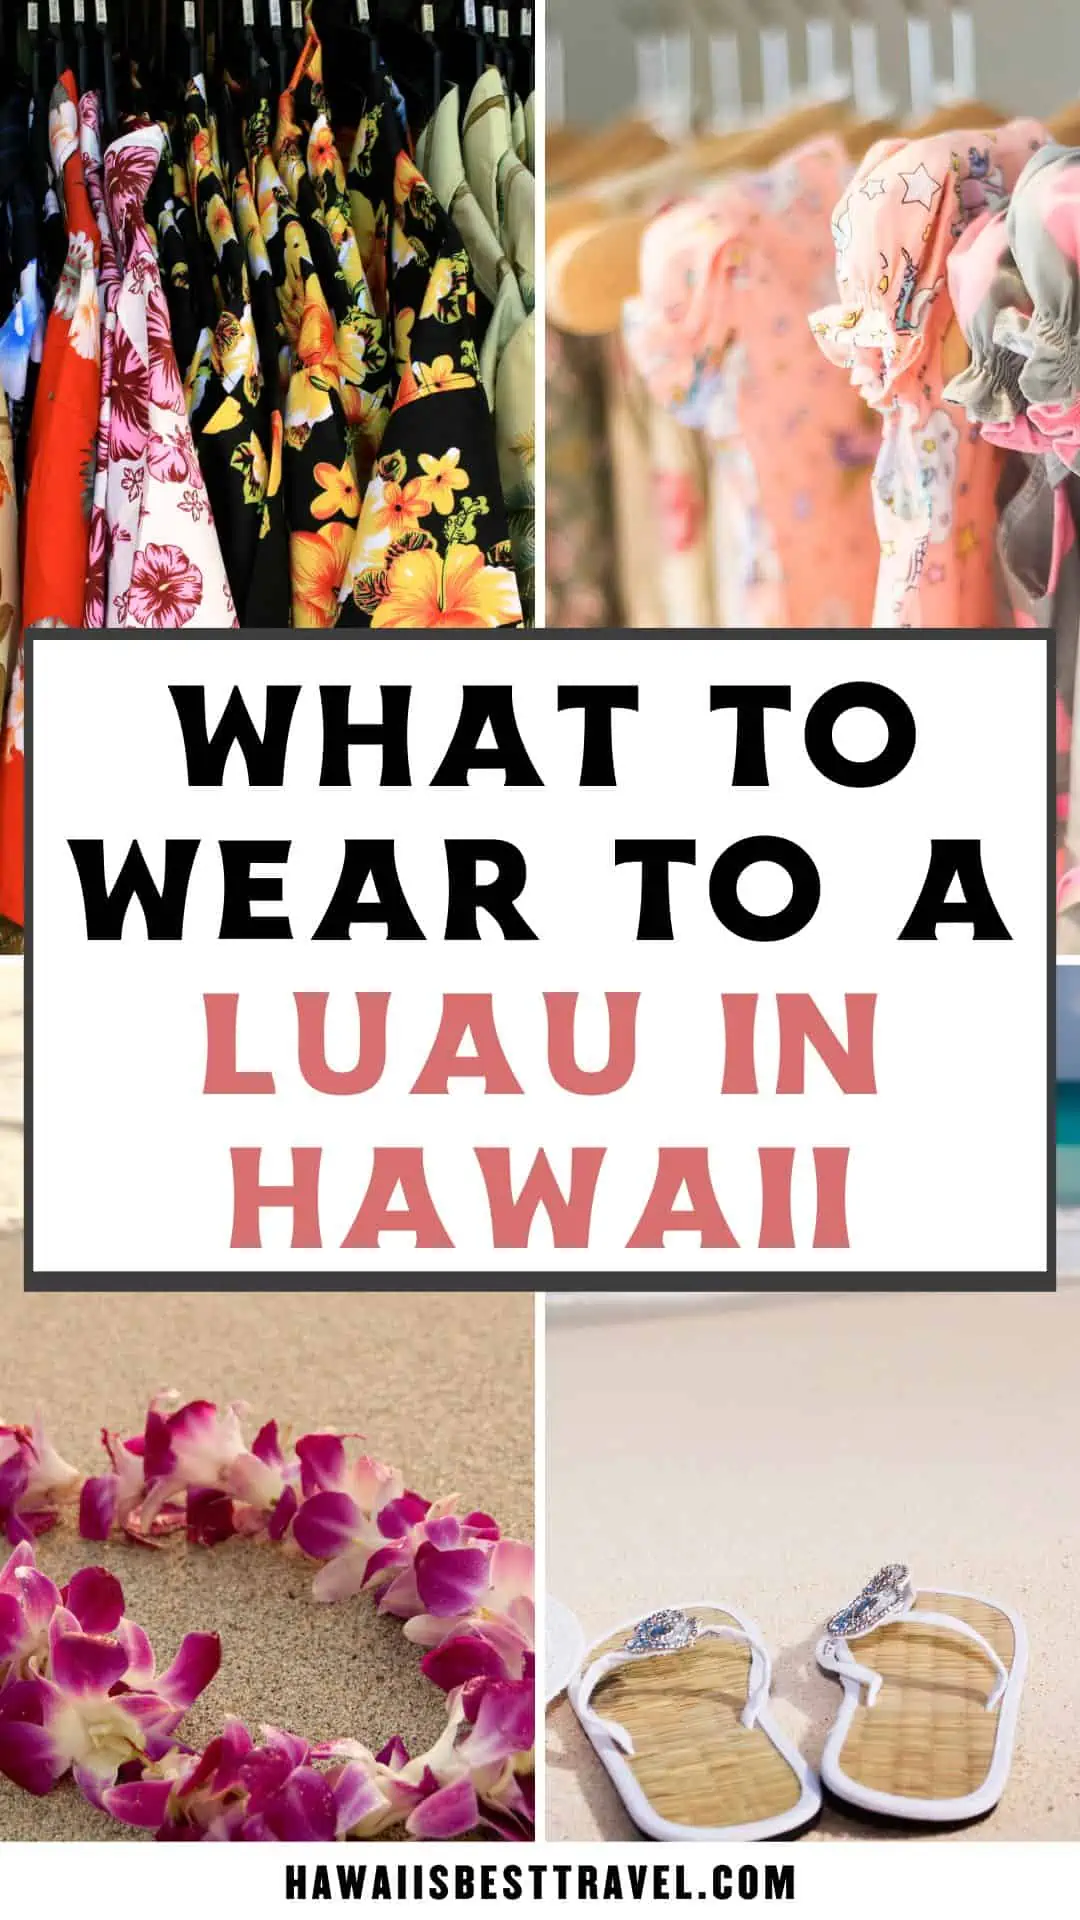 what to wear to a luau in hawaii - pin